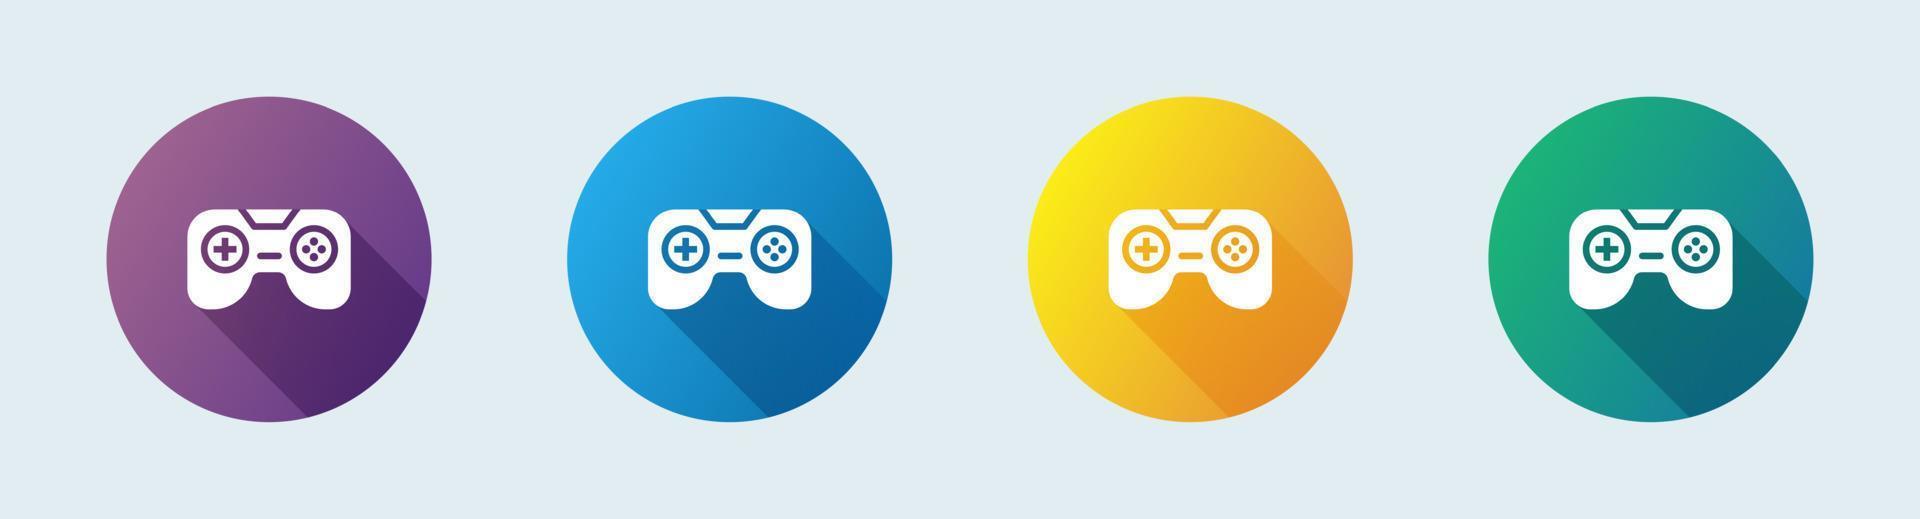 Joystick solid icon in flat design style. Game controller signs vector illustration.